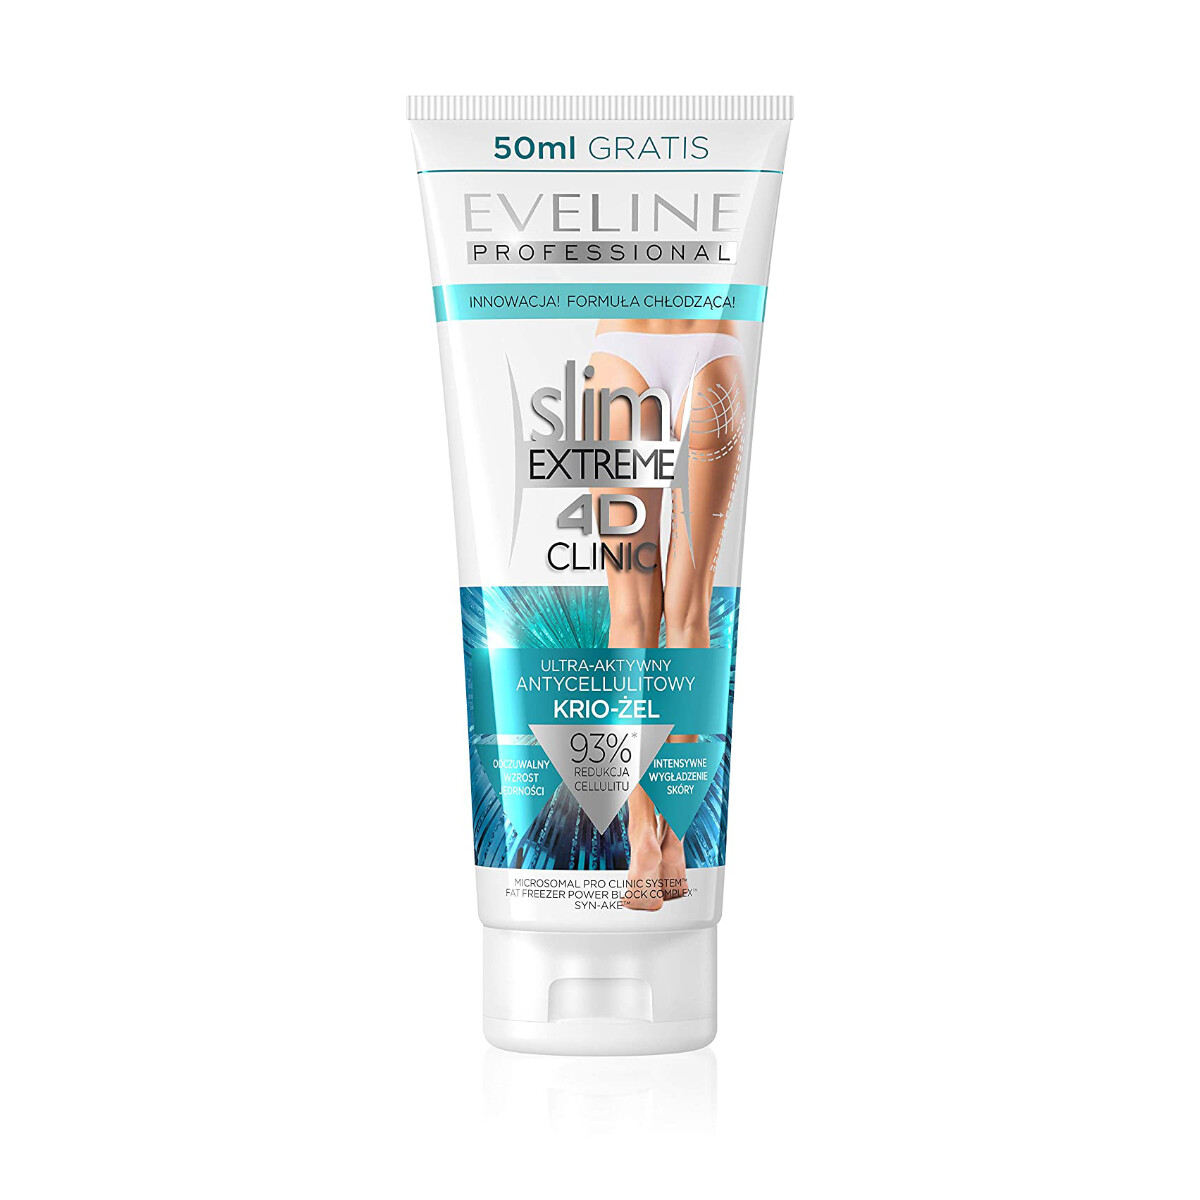 Slim Extreme 4D Clinic Ultra Active Anti Cellulite Cryo Gel Cooling Formula (T)